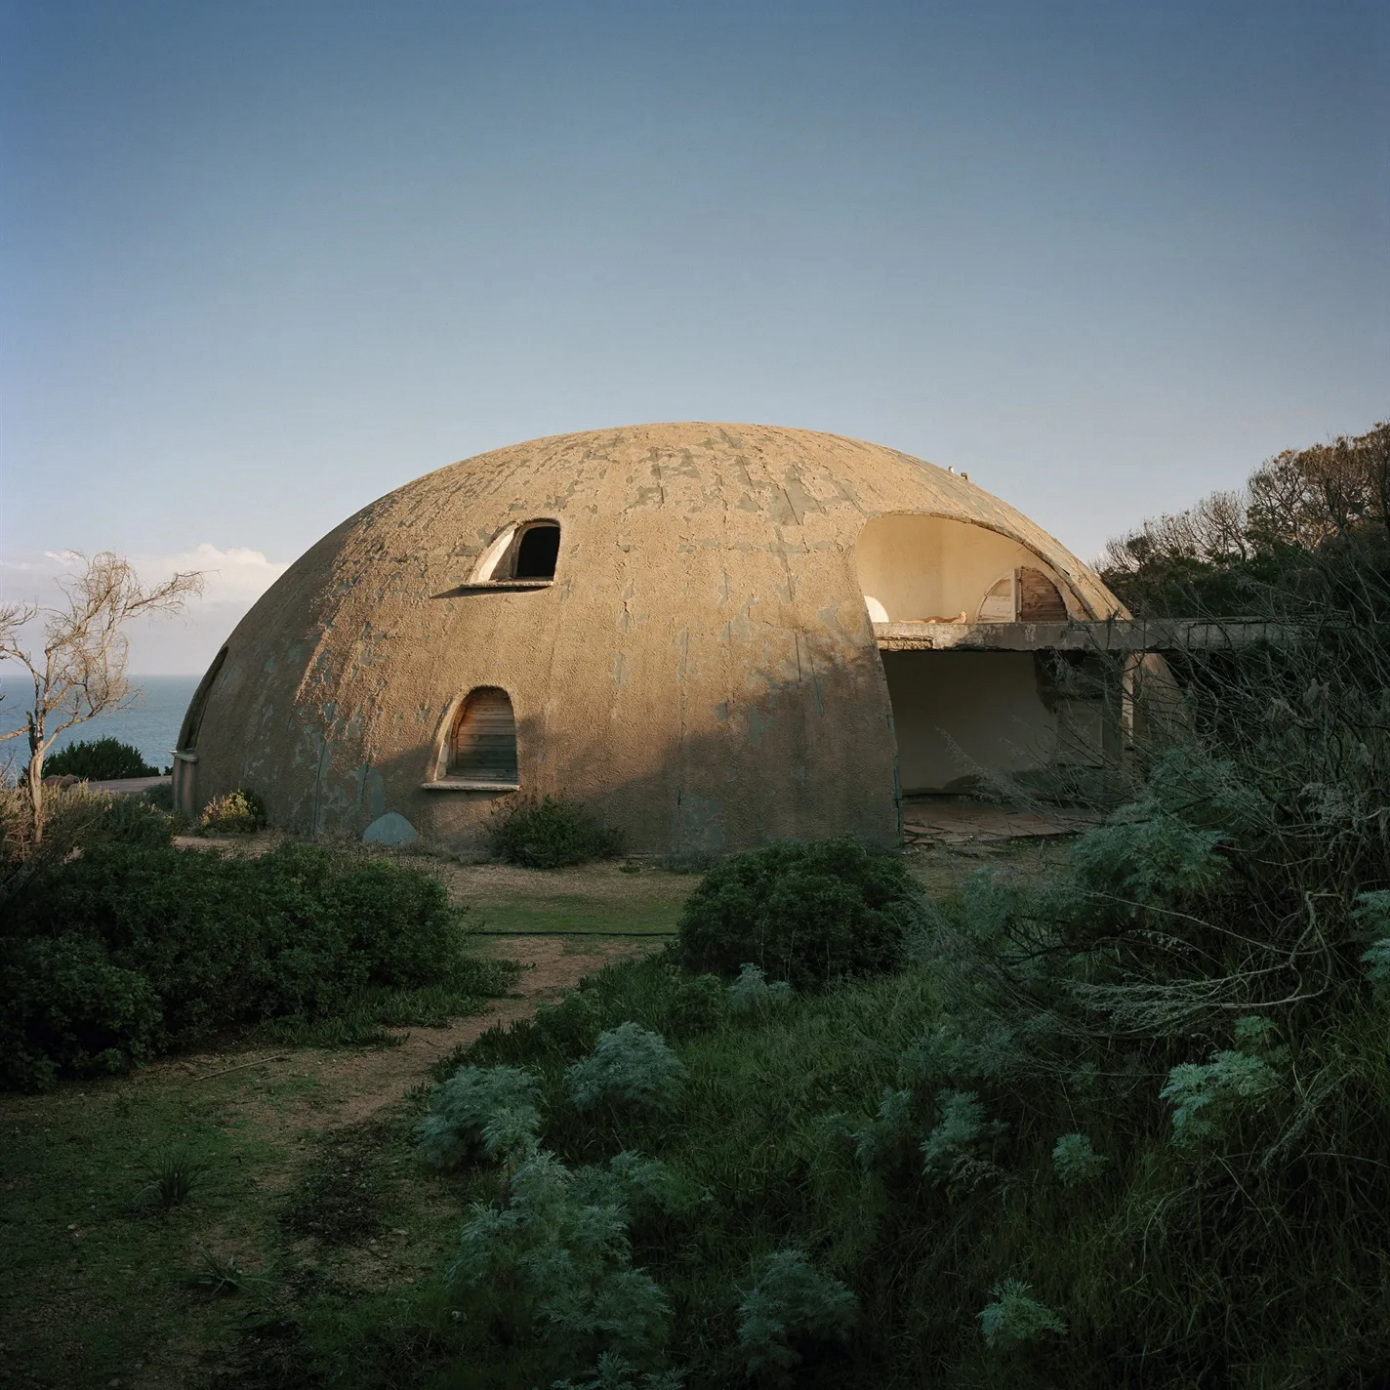 How a Dante Bini-Designed Dome Came to Reflect a Failed Romance—and Architectural Innovation